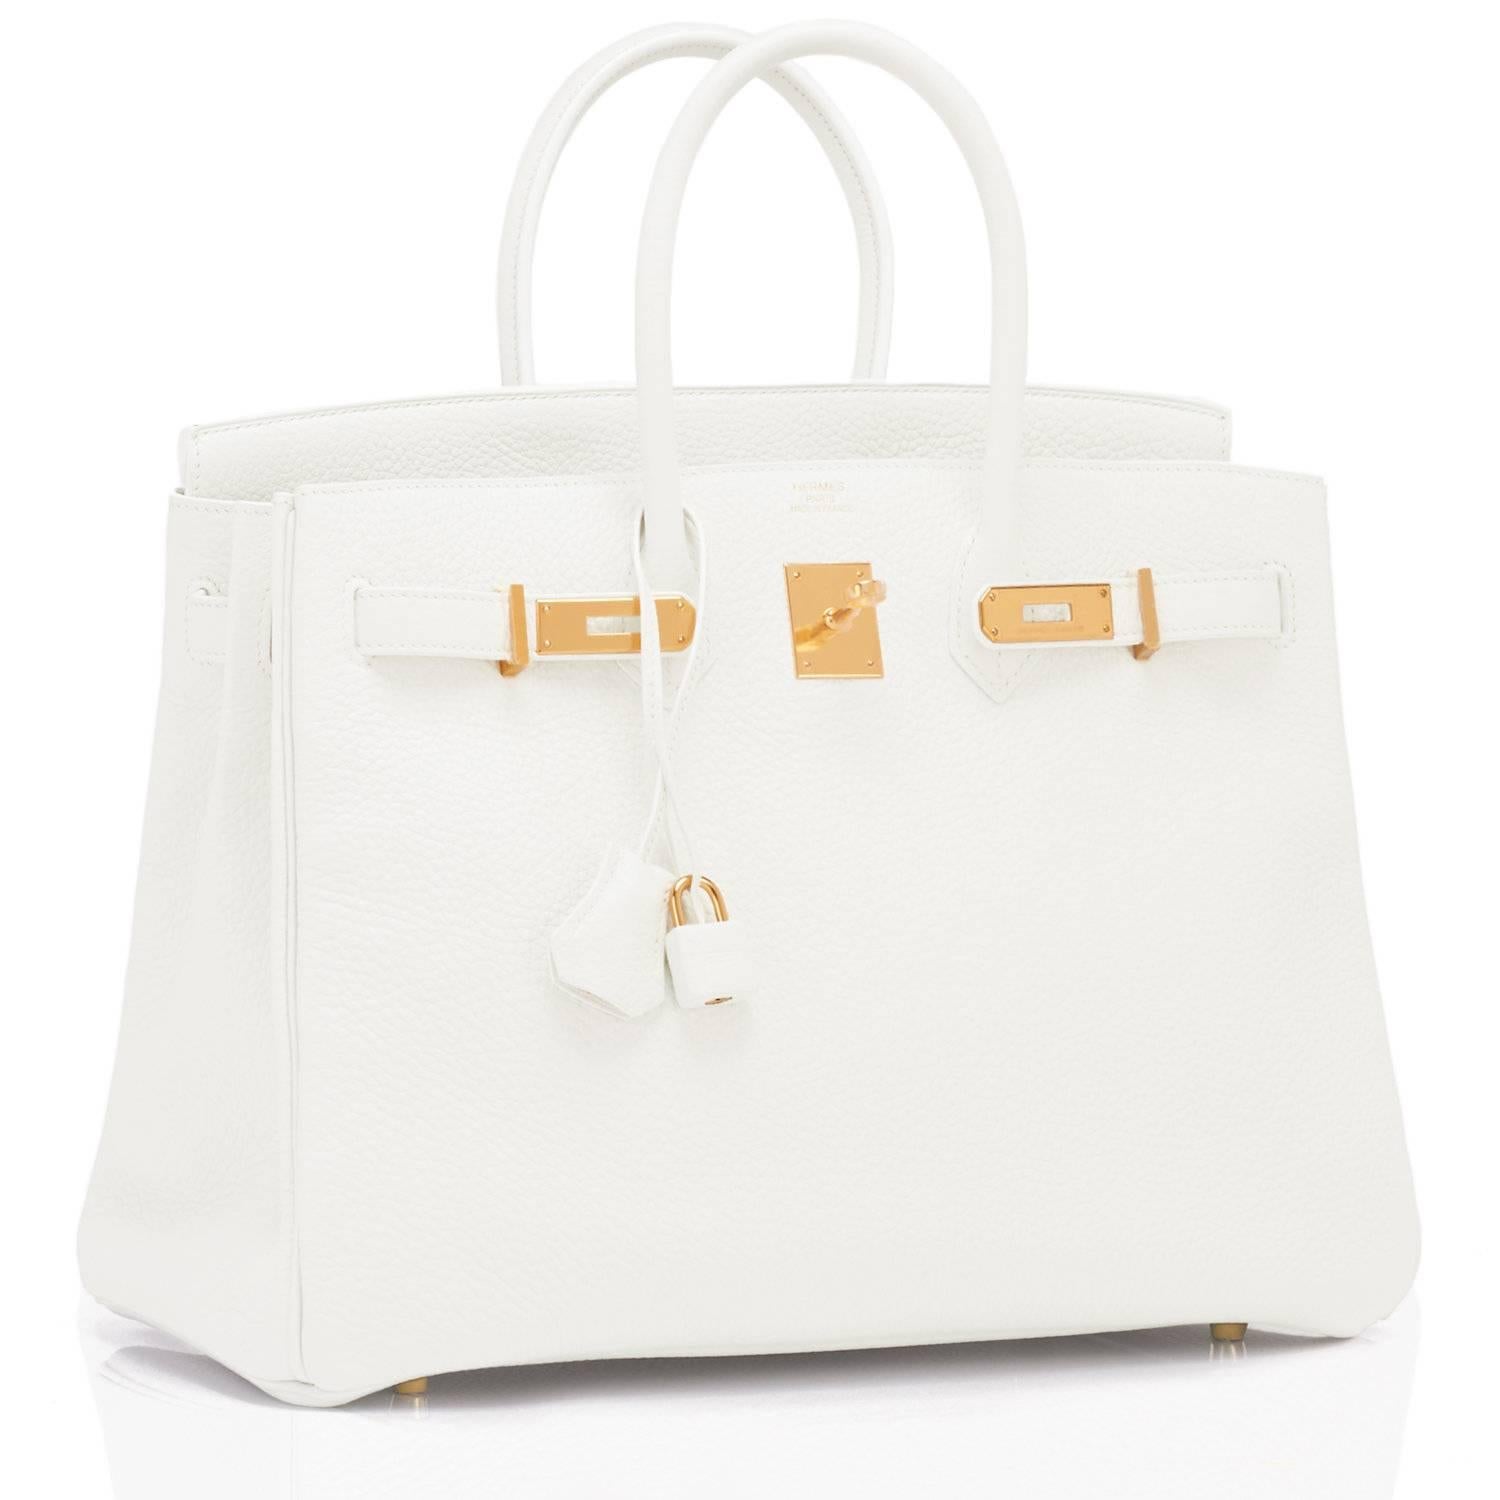 Hermes White 35cm Leather Birkin Gold Hardware New 
X Stamp.  Brand New in Box.  Store fresh. Pristine condition (with plastic on hardware). 
Perfect gift! Comes full set with keys, lock, clochette, a sleeper for the bag, rain protector, Hermes